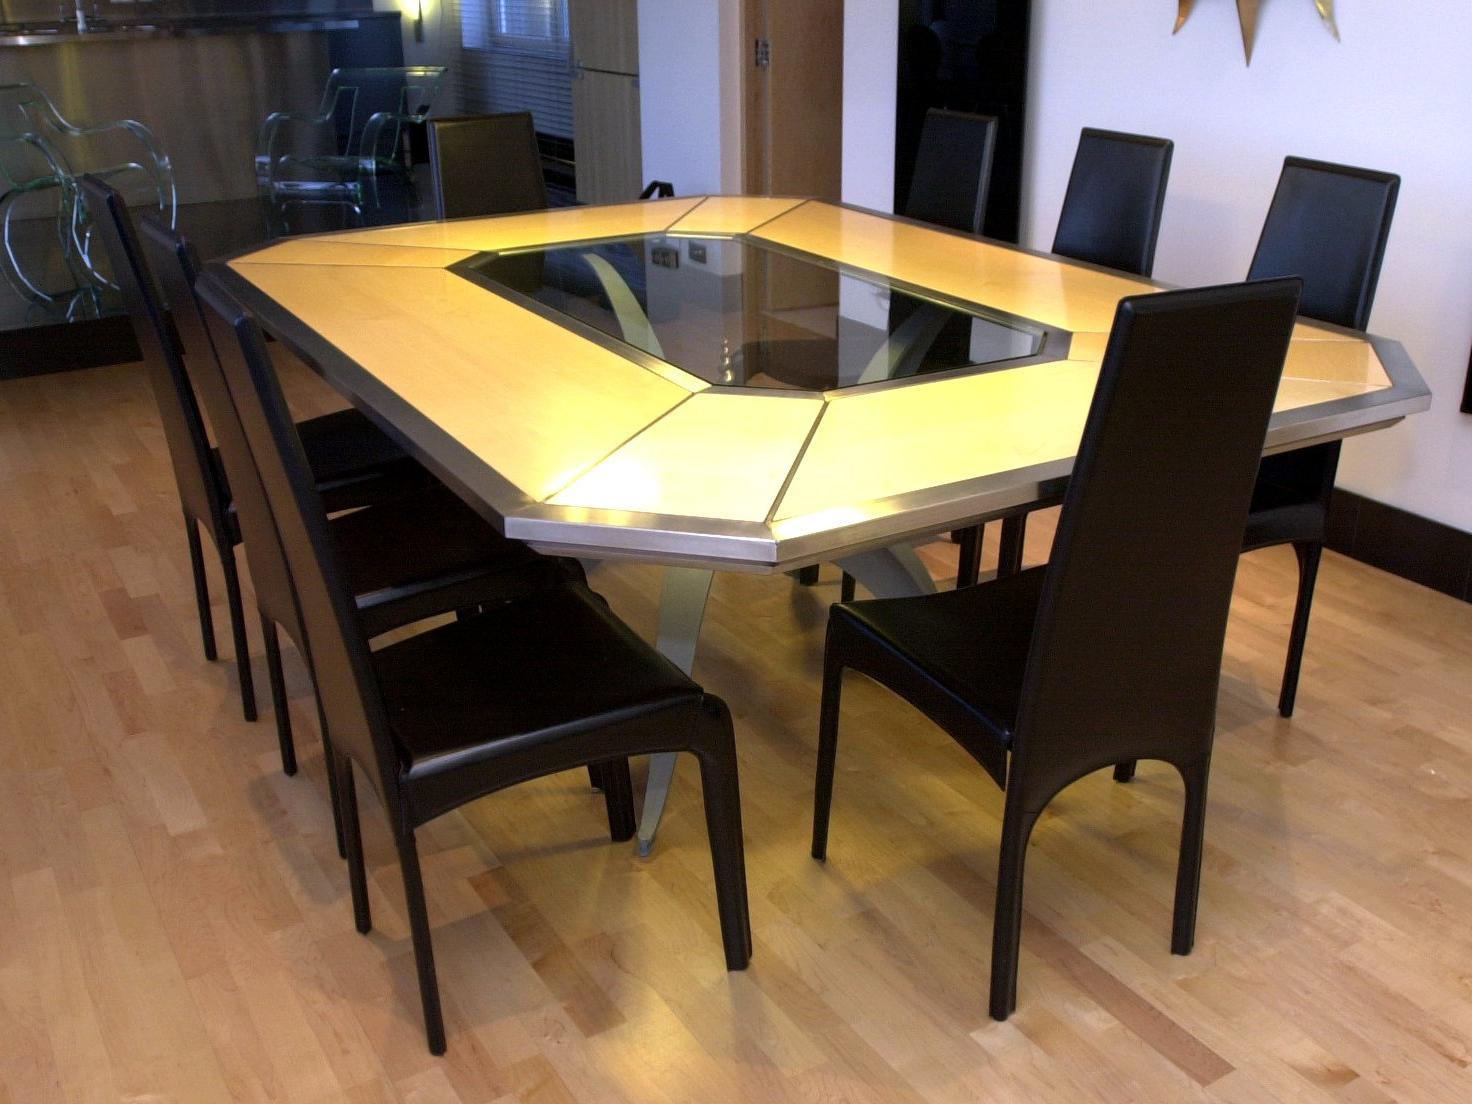 City centre living was becoming more popualr in Leeds. This seven thousand pound dining table was part of the lifestyle offering at an apartment on Park Lane.